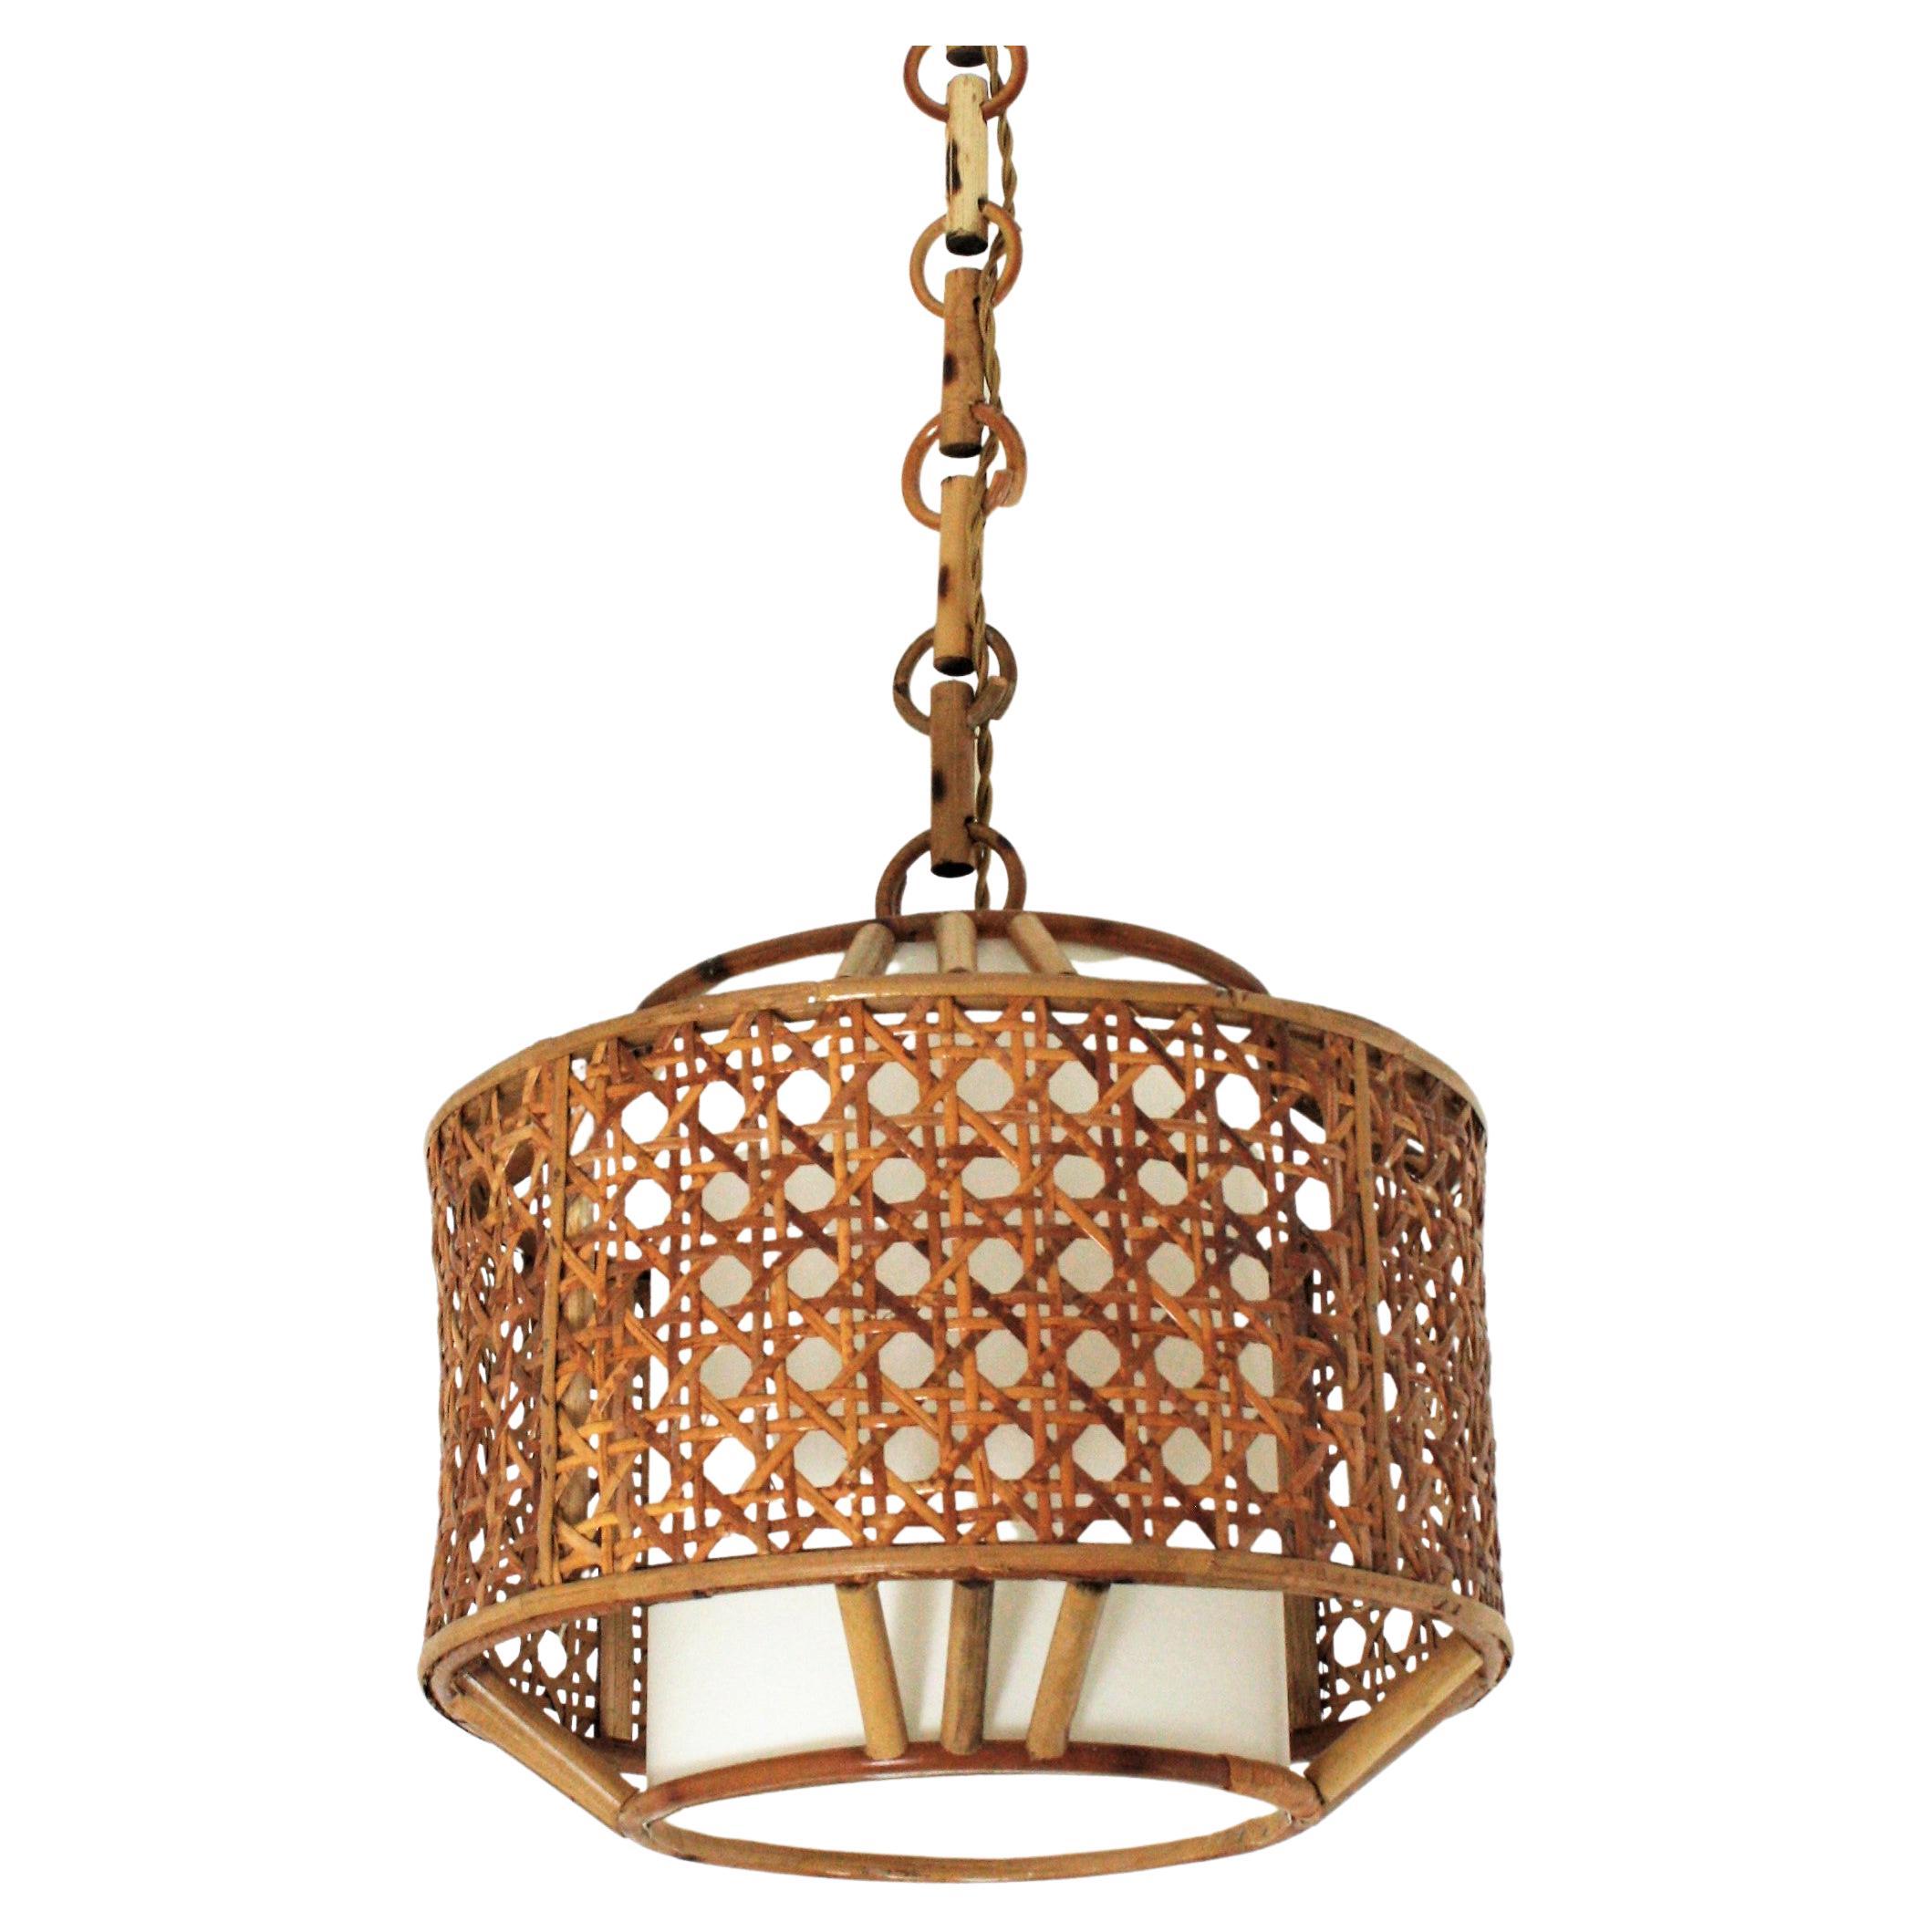 Bamboo Rattan and Wicker Weave Drum Pendant Light or Lantern  For Sale